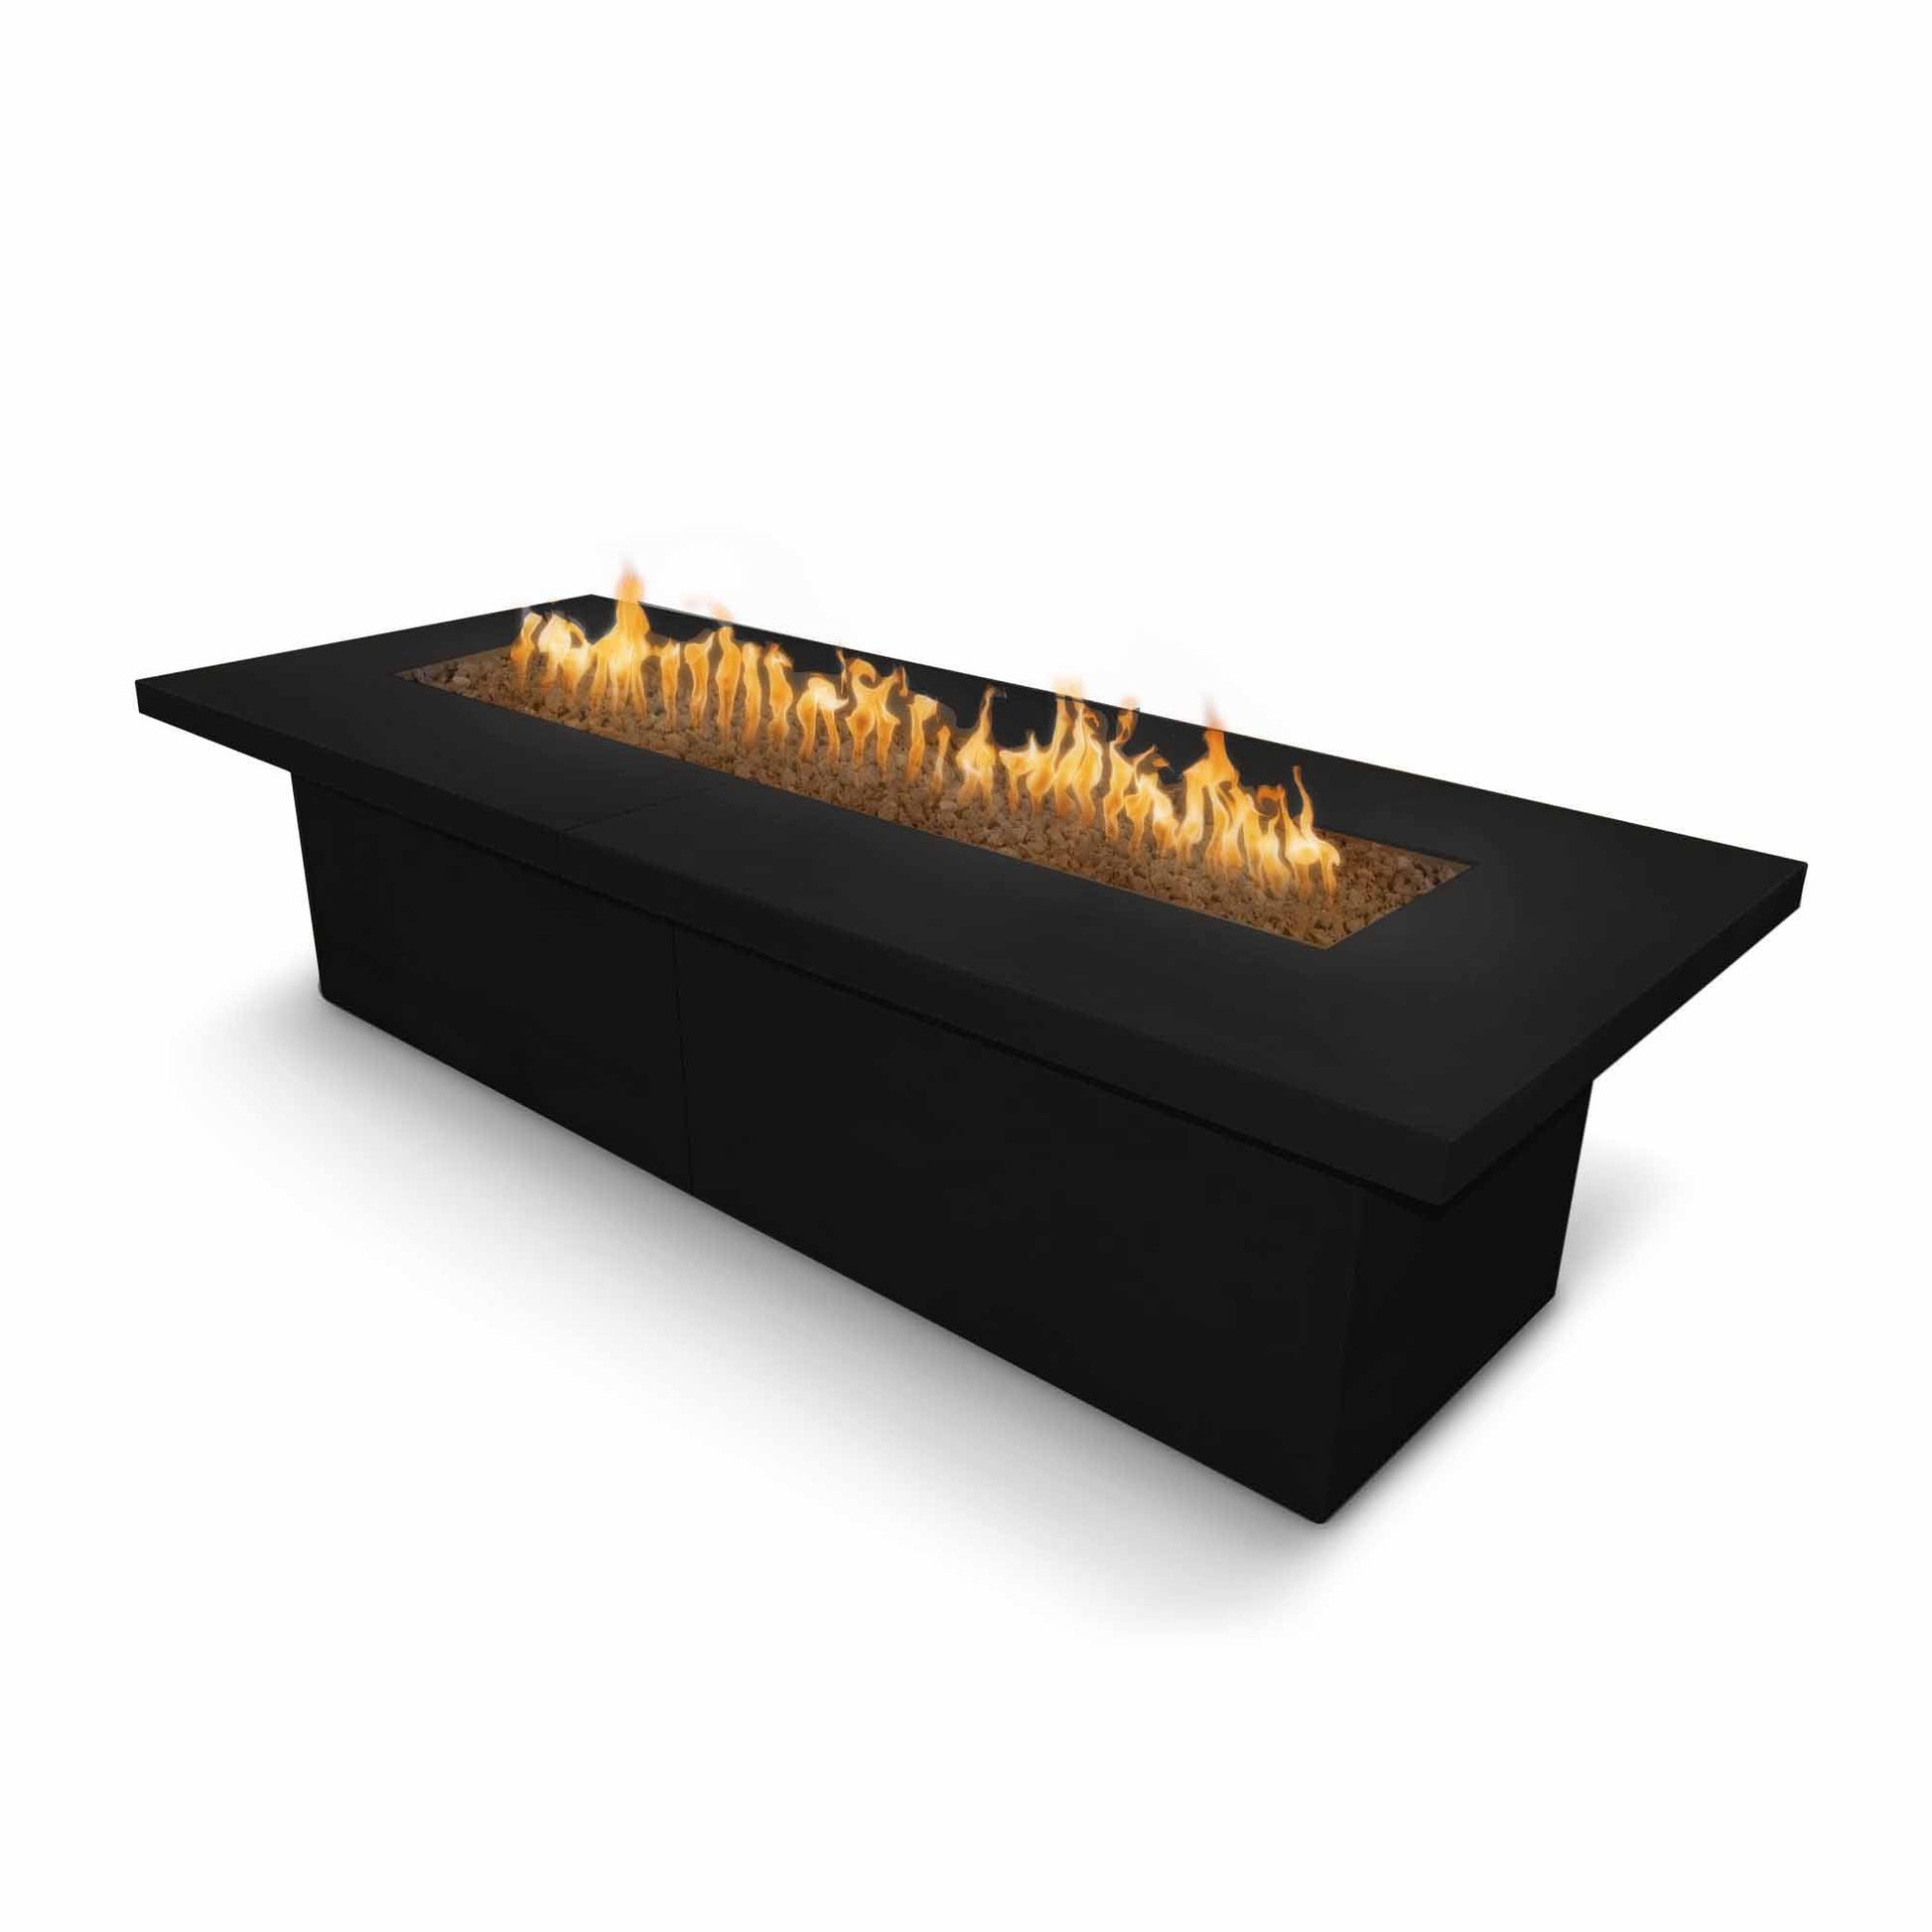 The Outdoor Plus Rectangular Newport 72" Corten Steel Natural Gas Fire Pit with Match Lit Ignition